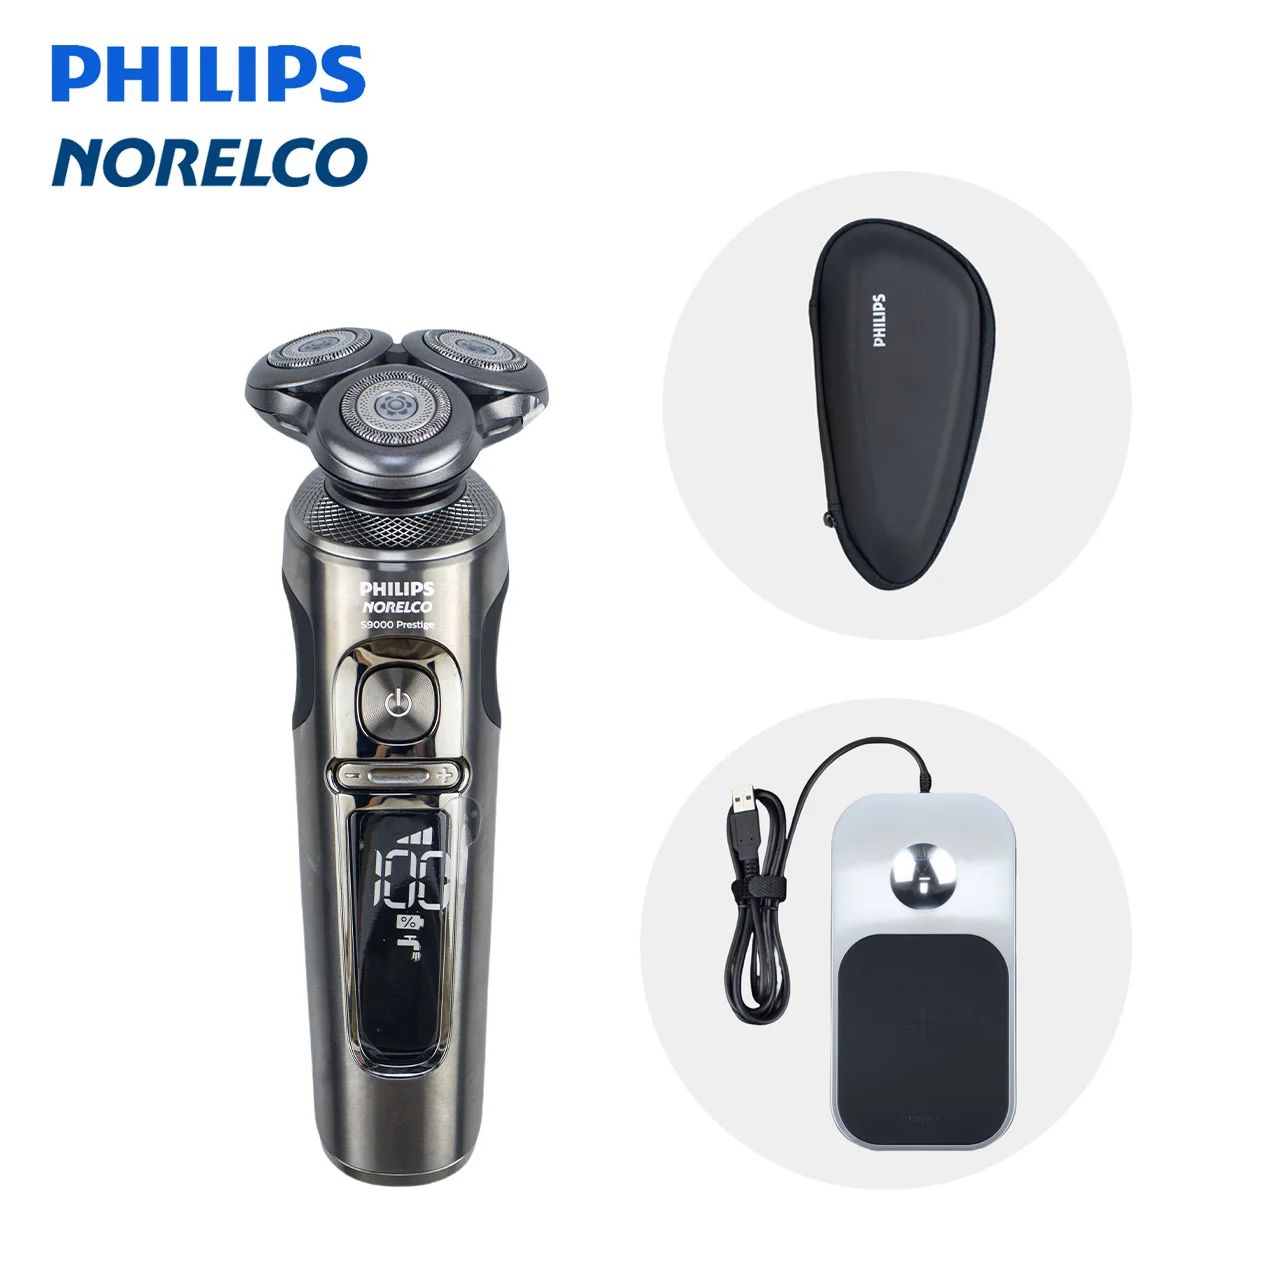 

Philips Norelco Electric Shaver series 9000 with accessories, Wet & dry, electric rotation shaver for men, SP9860 Black